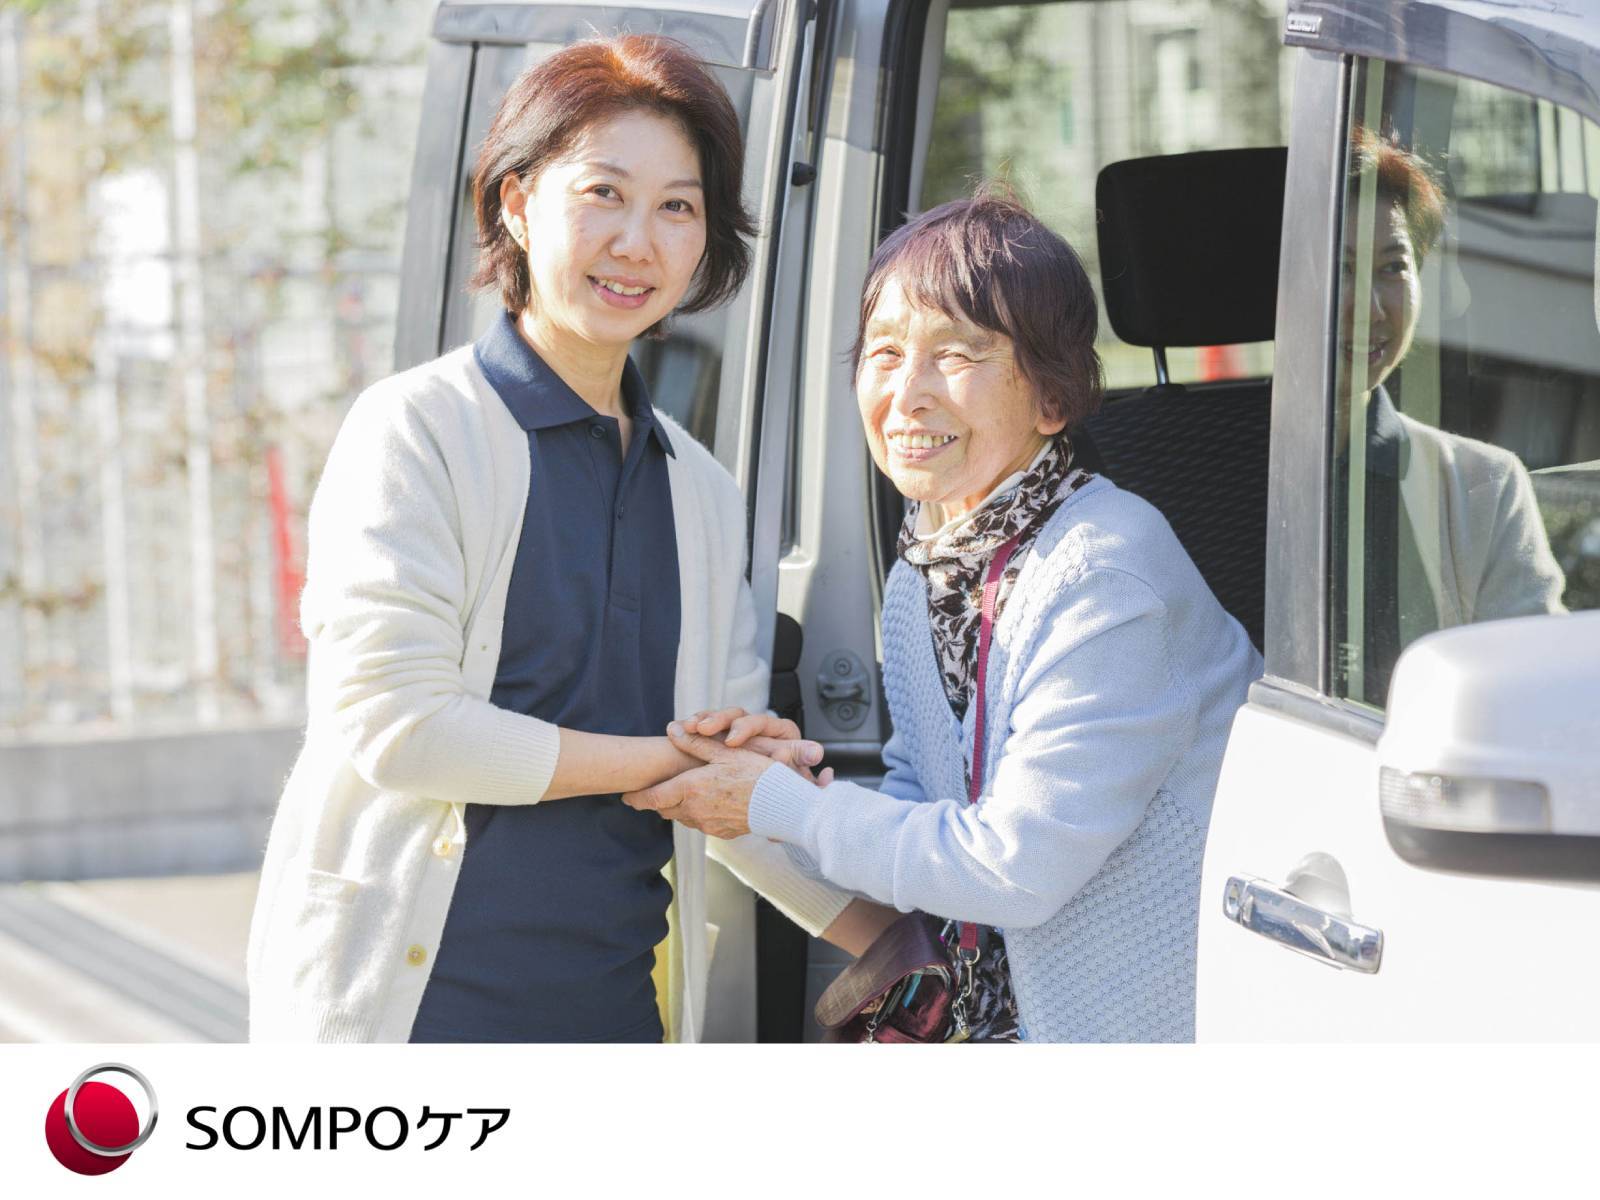  SOMPOケア 山形桜田訪問介護 の求人3